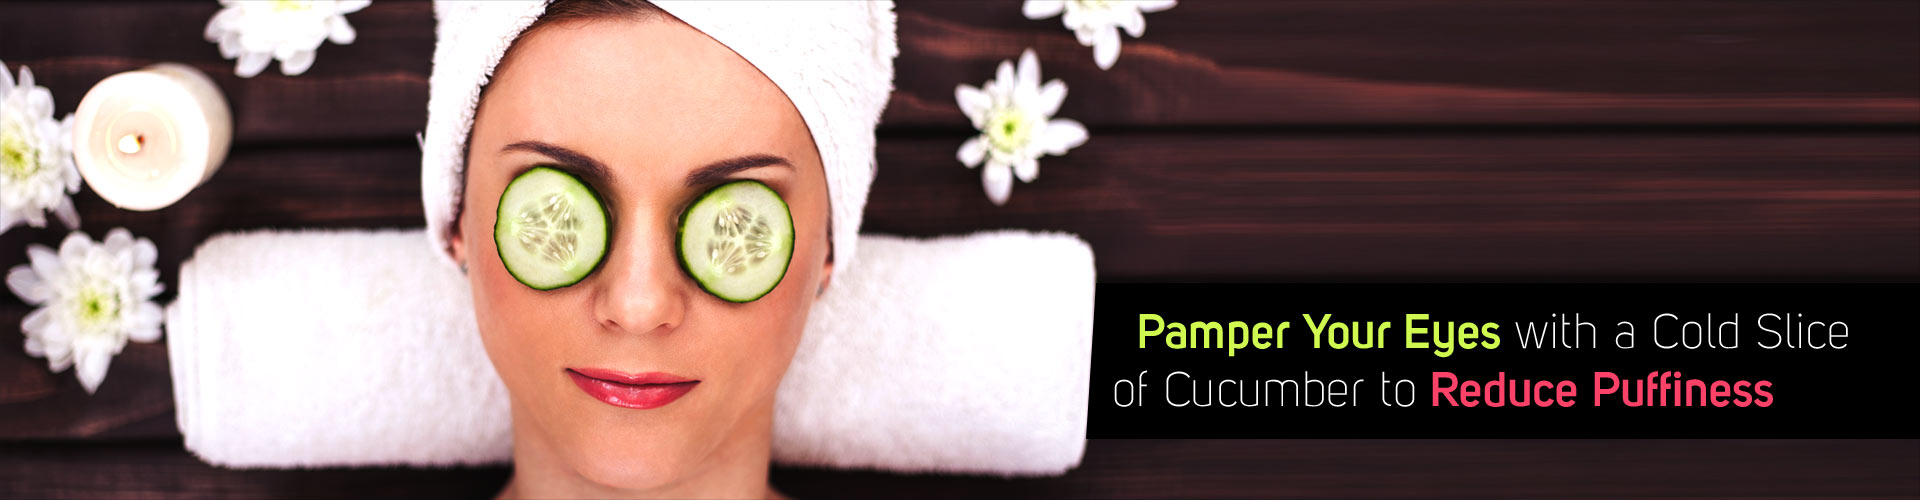 Pamper Your Eyes with Cold Slice of Cucumber to Reduce Puffiness